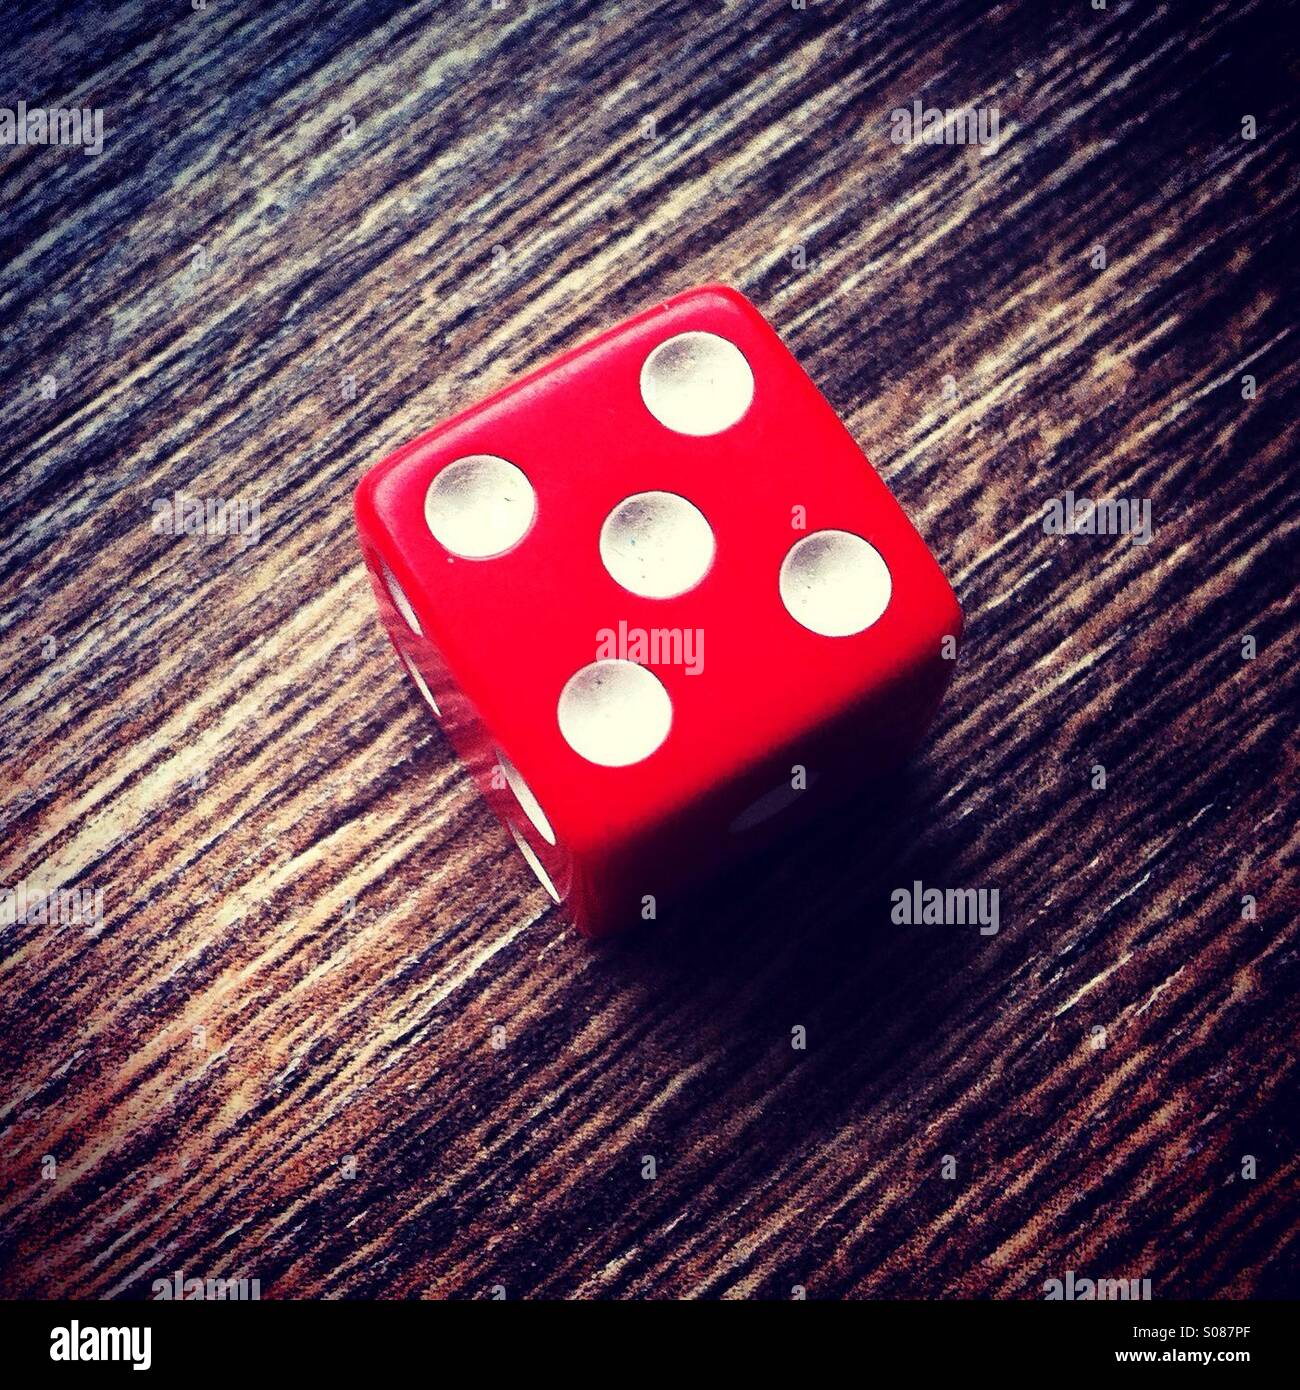 Red dice showing number 5 Stock Photo